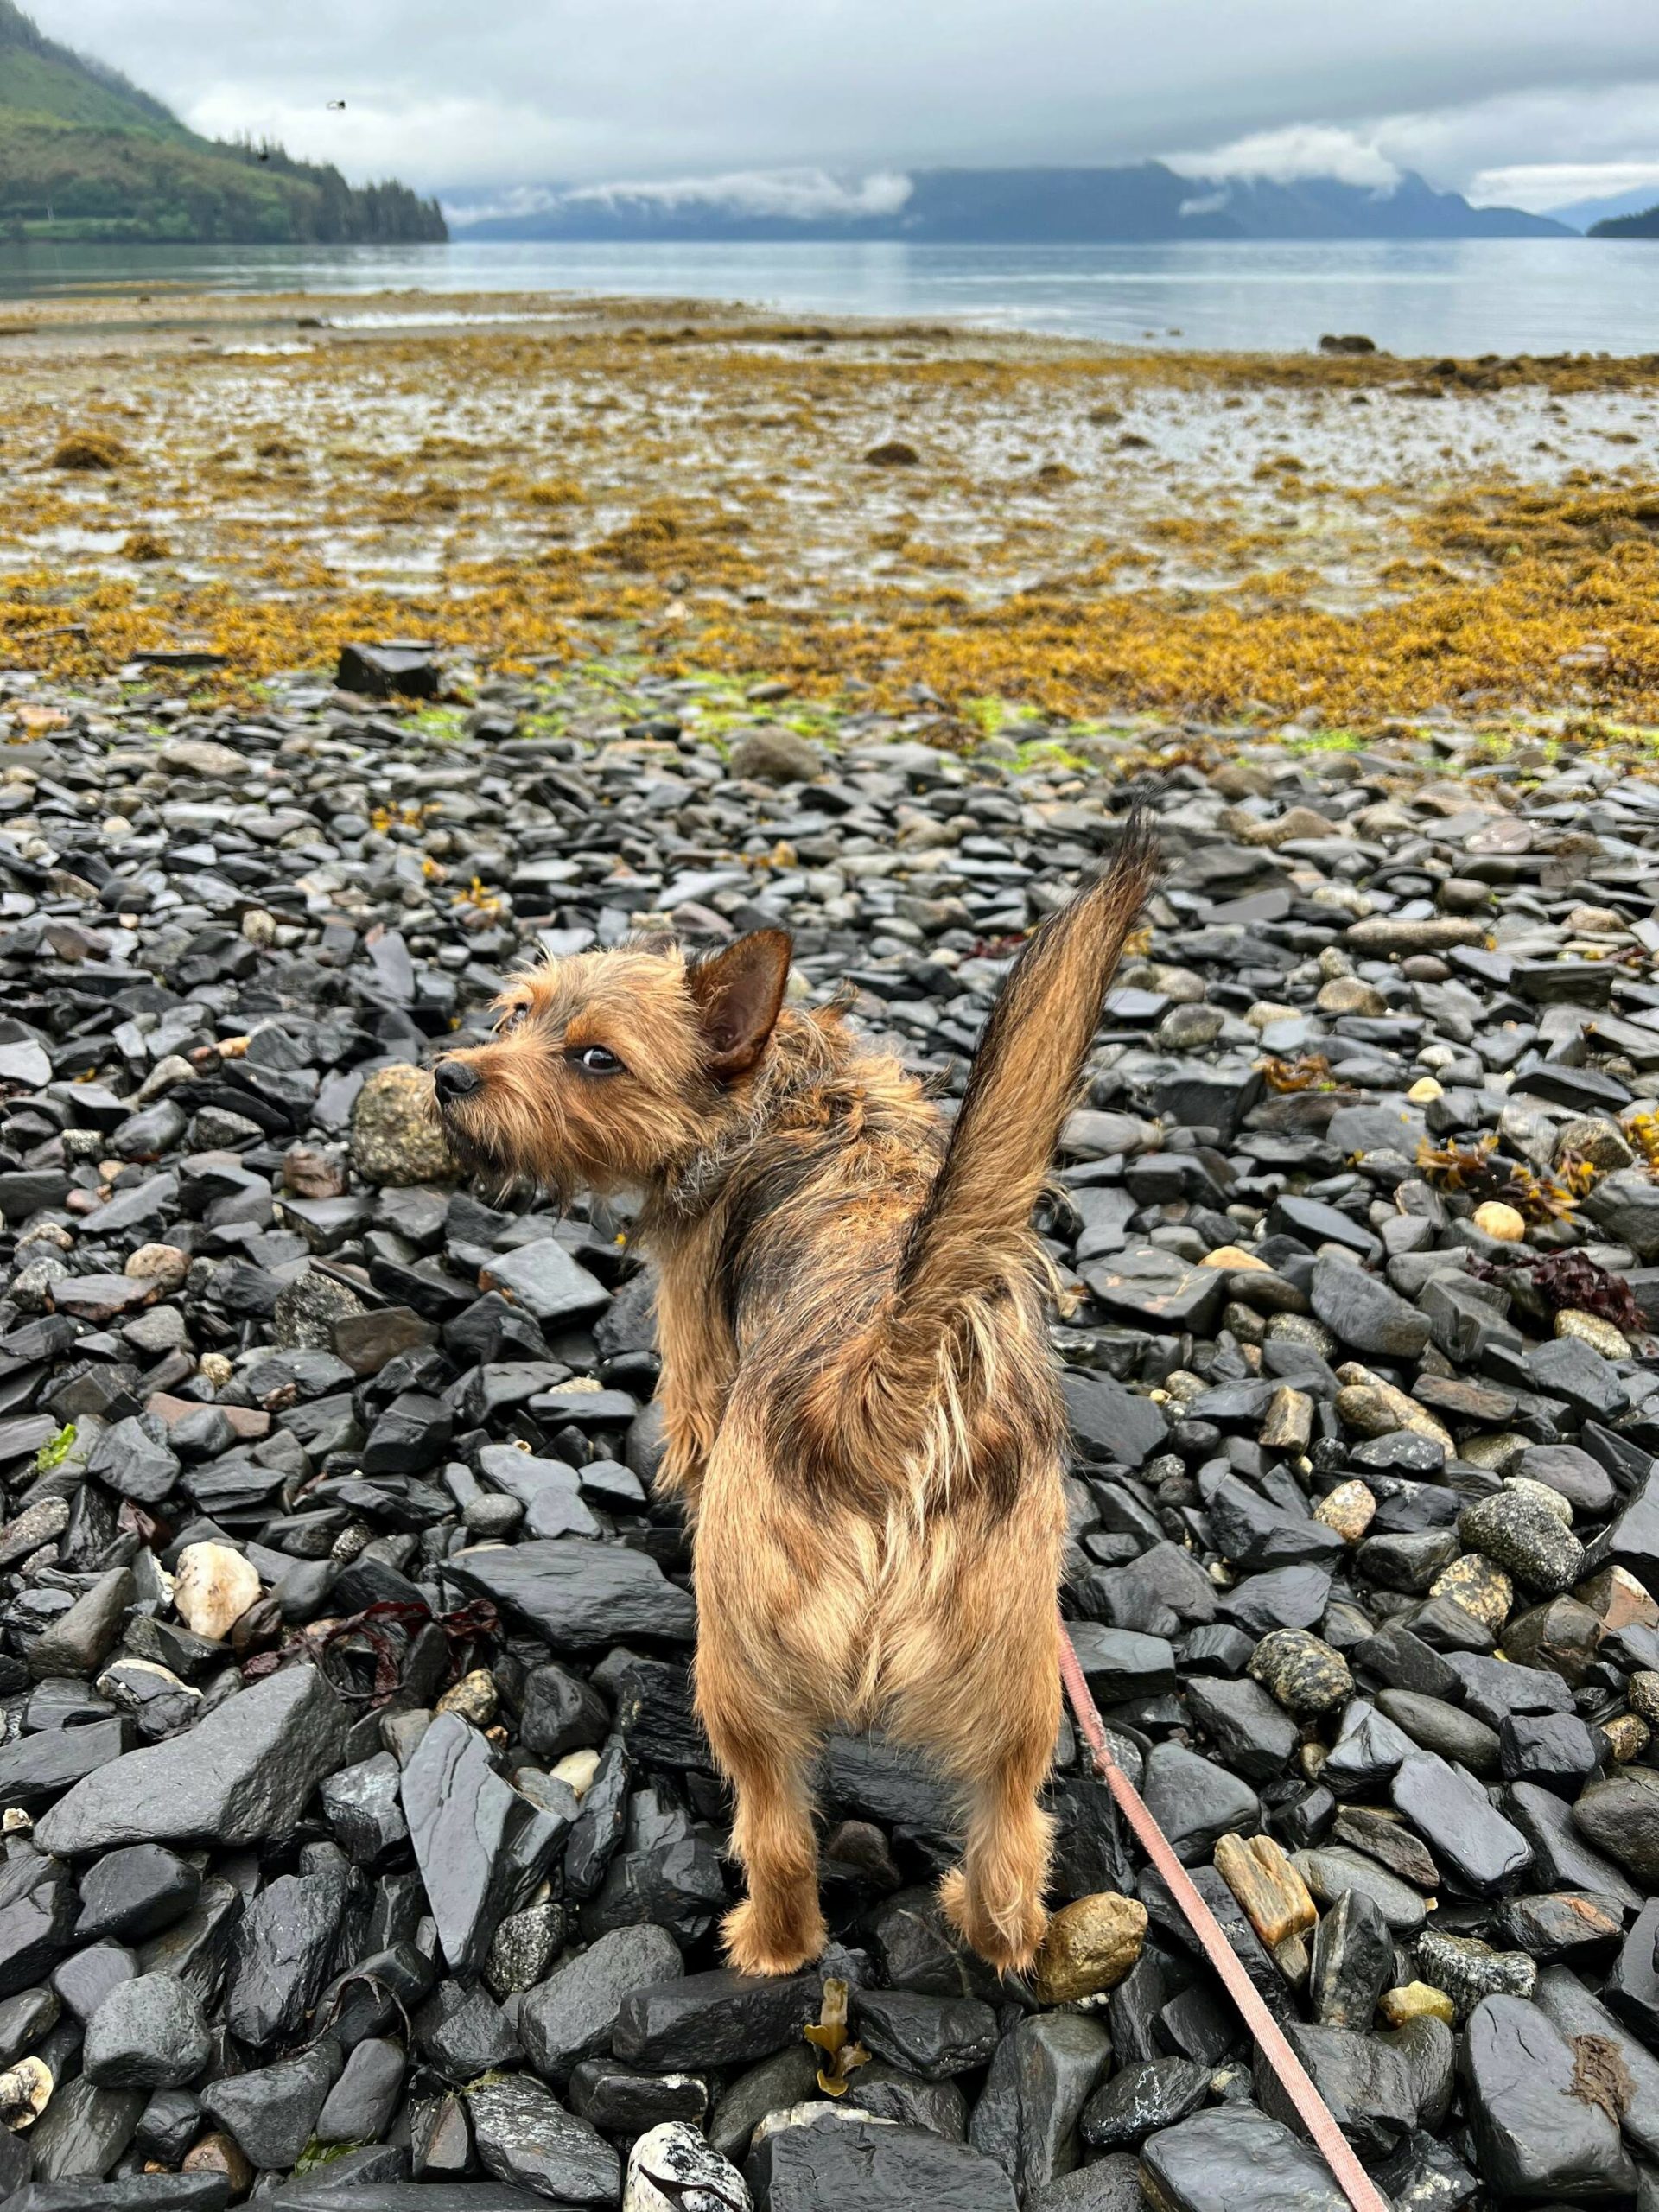 Ada gives a sideways glance as she explores our beach for the first time at Mickey’s Fishcamp. in Wrangell. (Courtesy Photo / Vivian Faith Prescott)